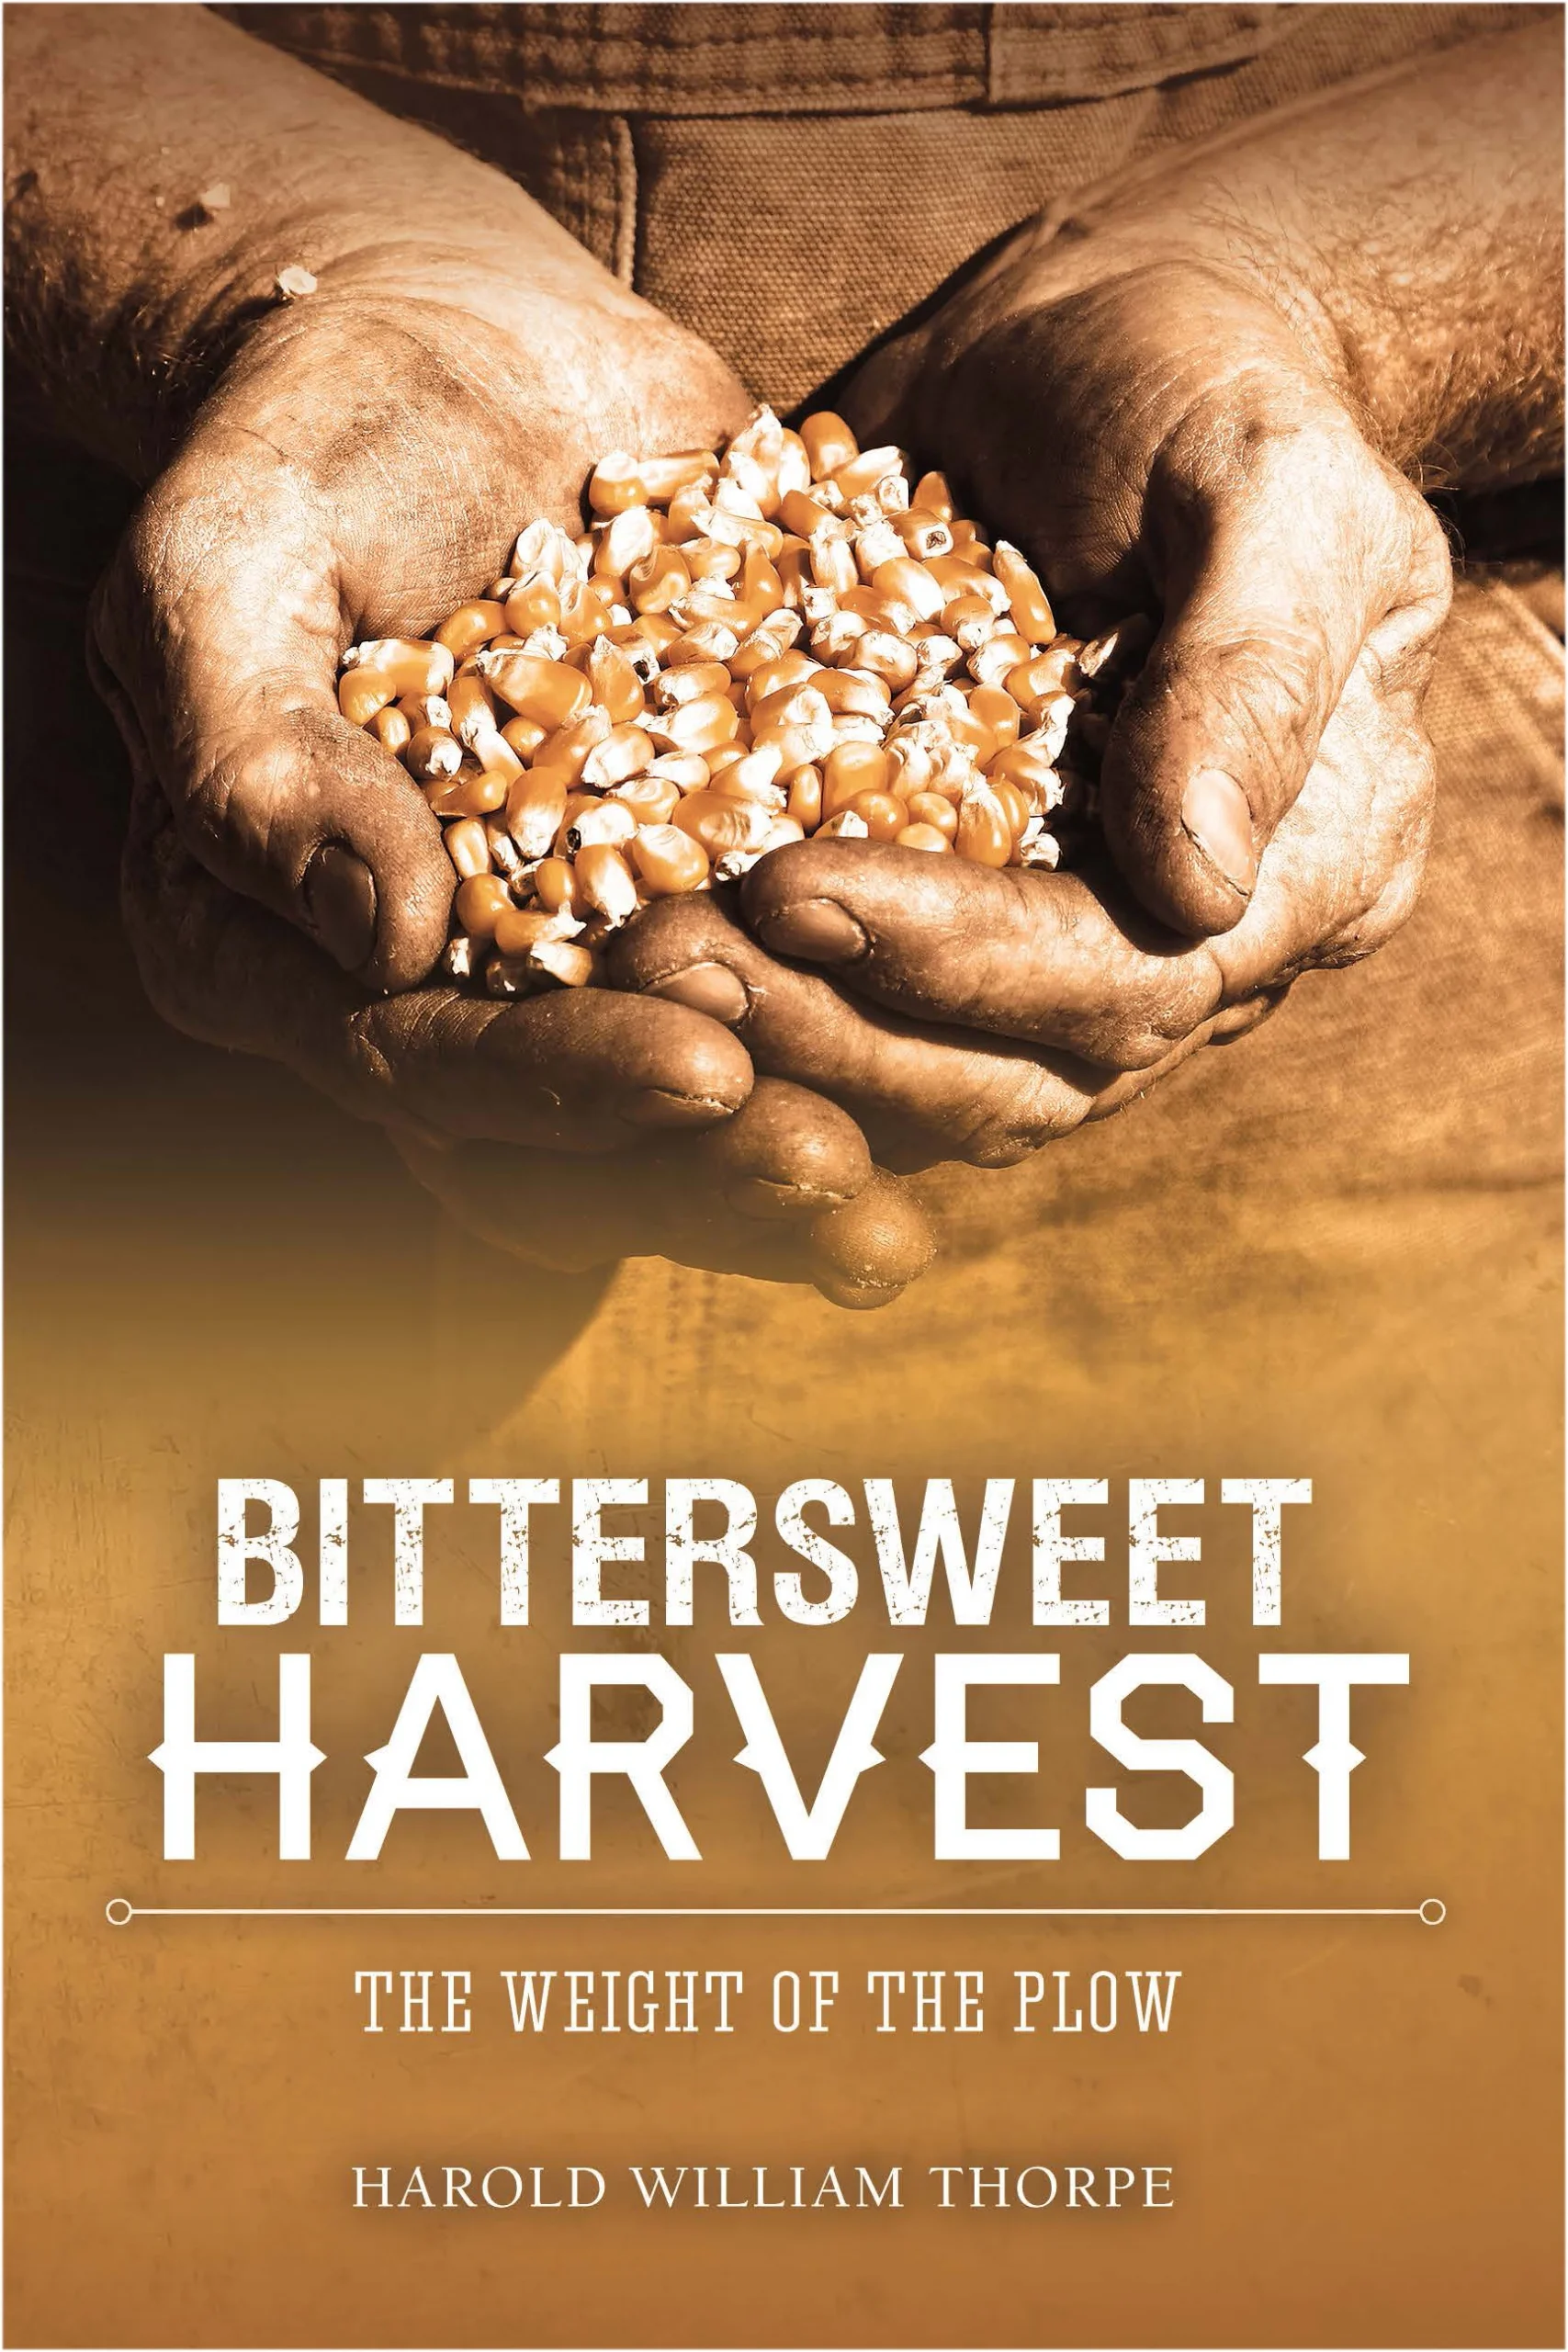 bittersweet harvest book cover